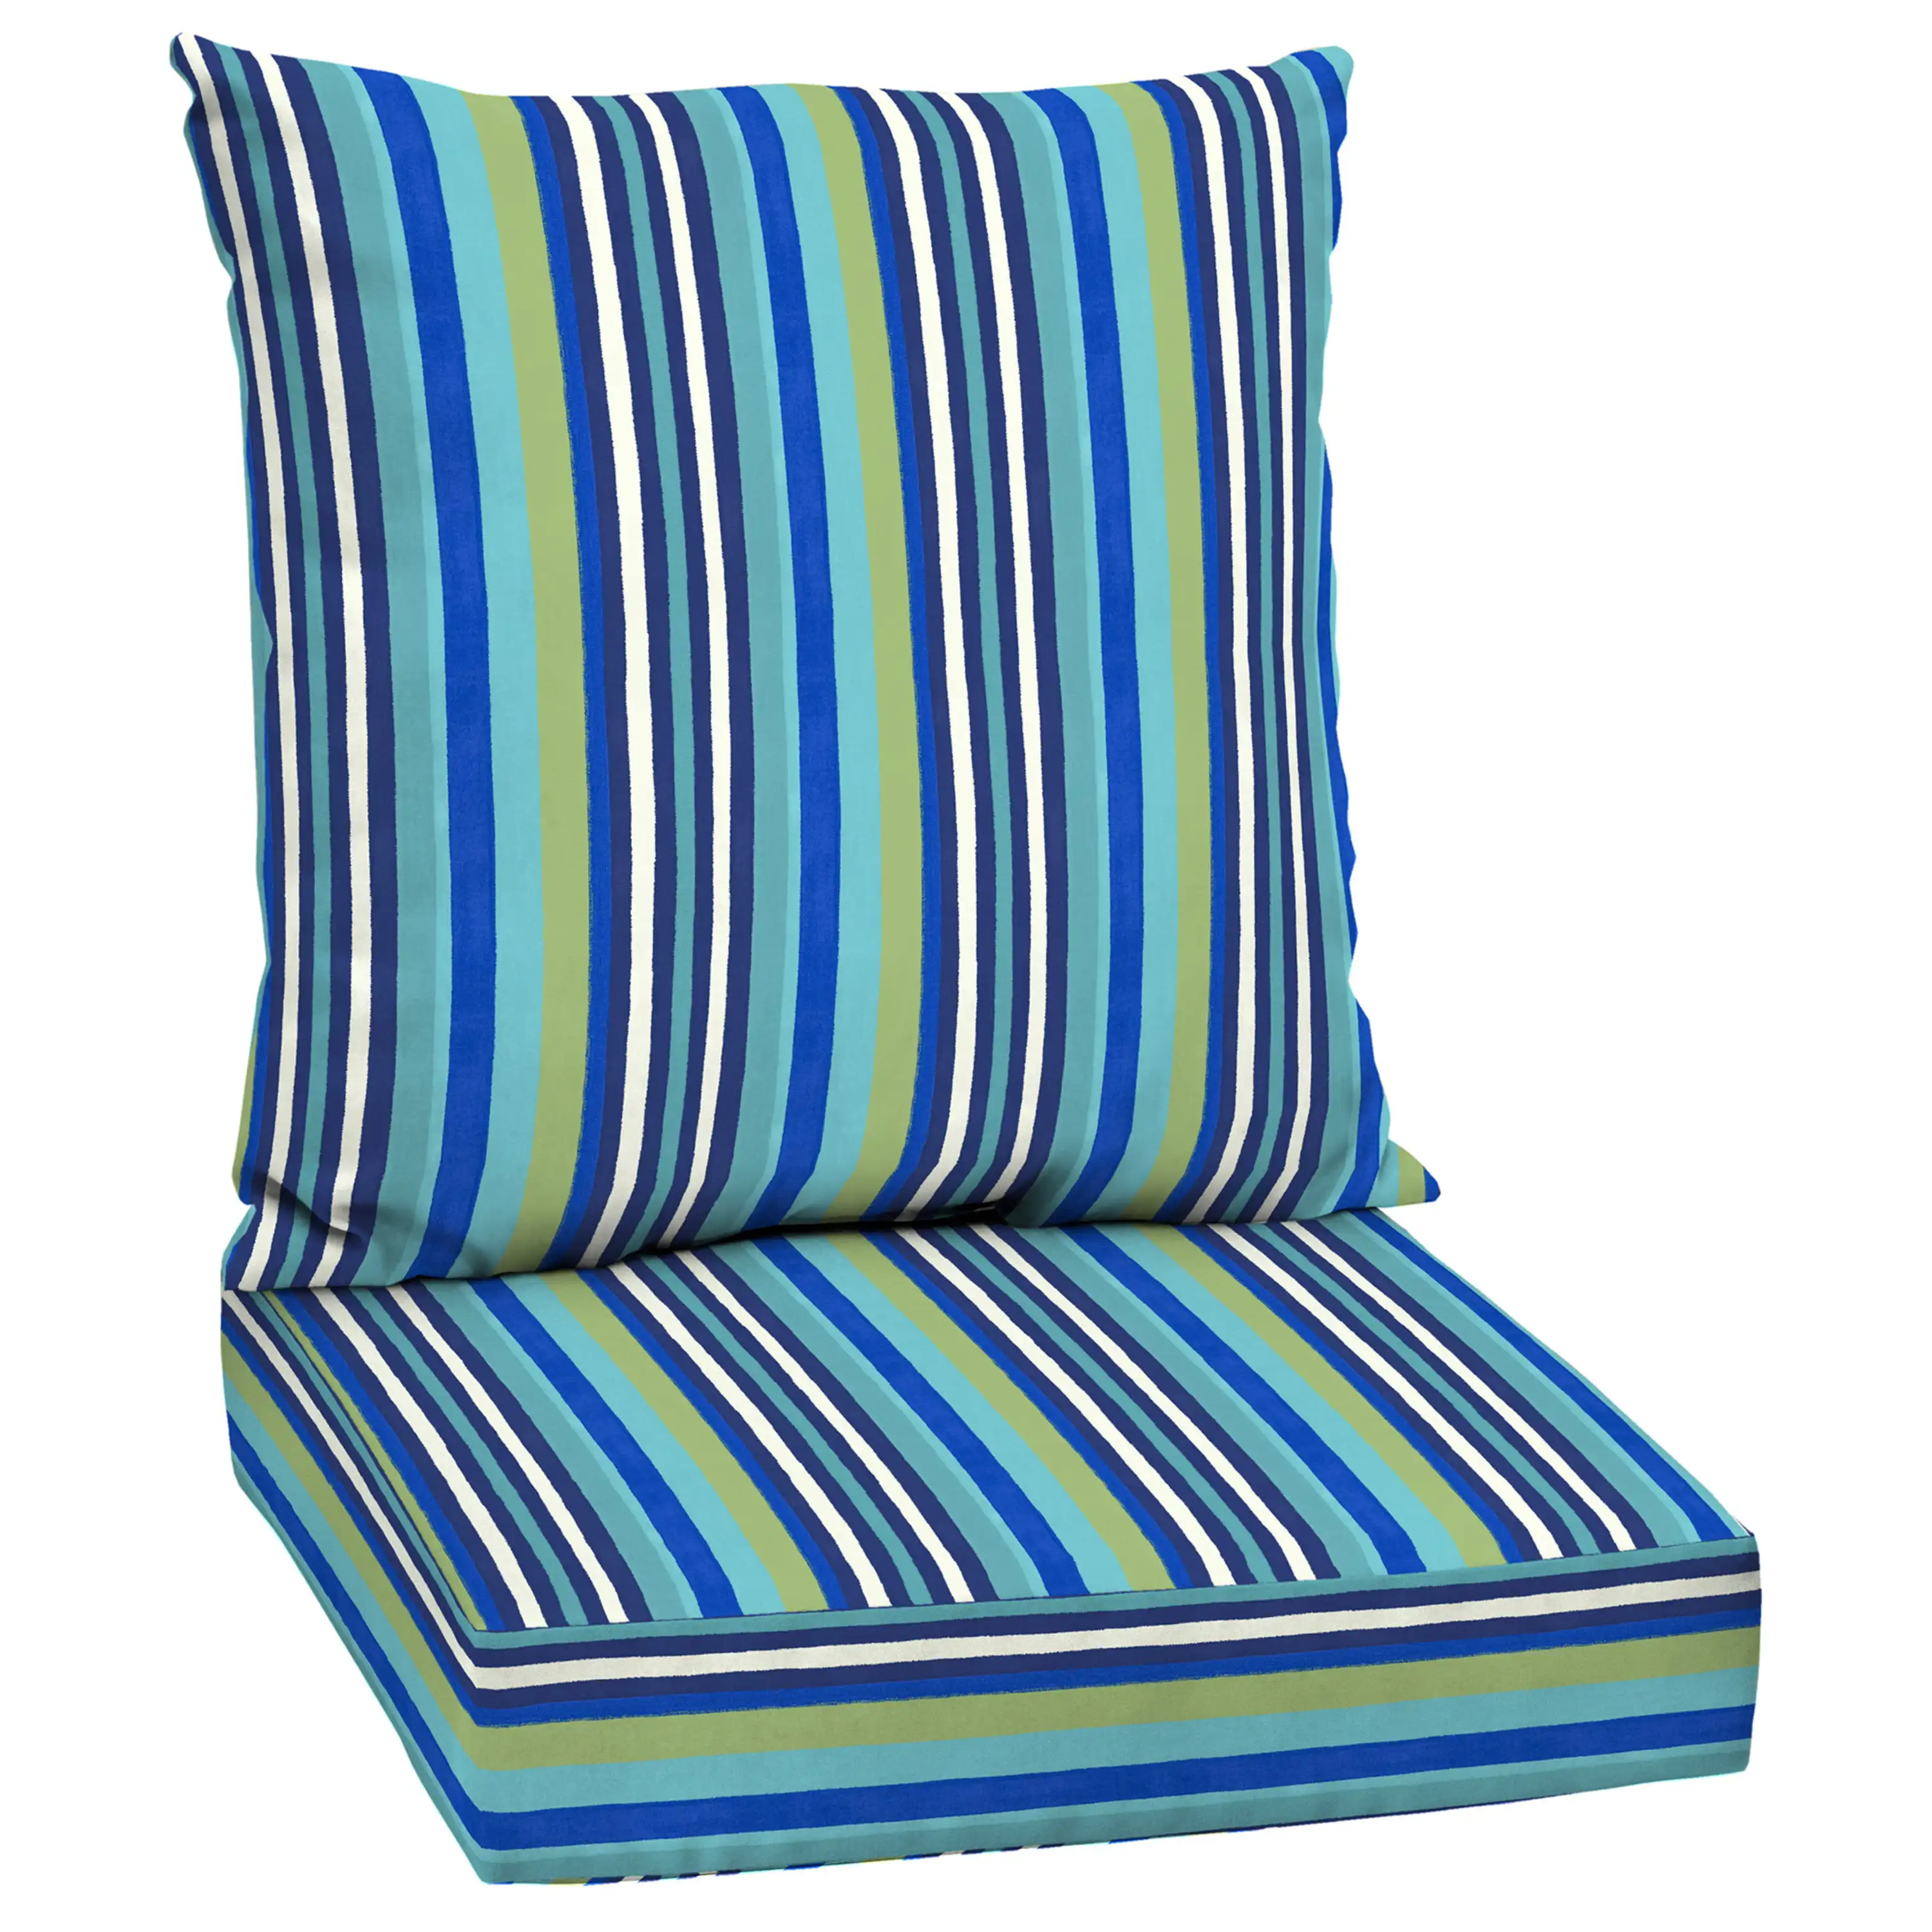 

Mainstays 48" x 24" Turquoise Stripe Rectangle Outdoor 2-Piece Deep Seat Cushion